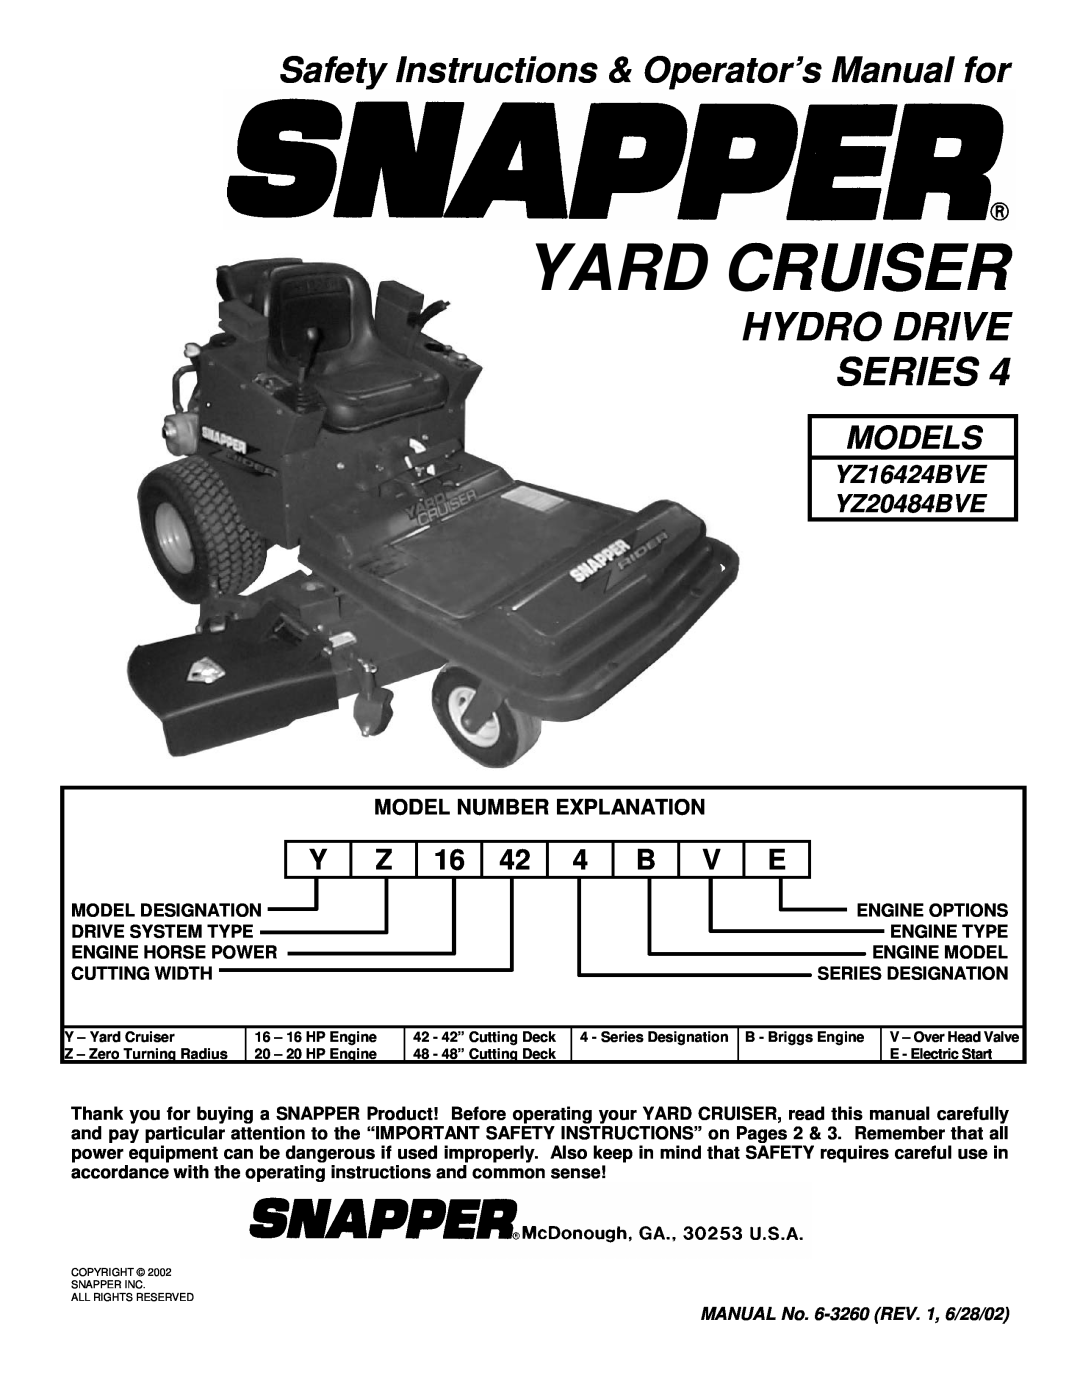 Snapper YZ16424BVE, YZ20484BVE important safety instructions Safety Instructions & Operator’s Manual for, Yard Cruiser 